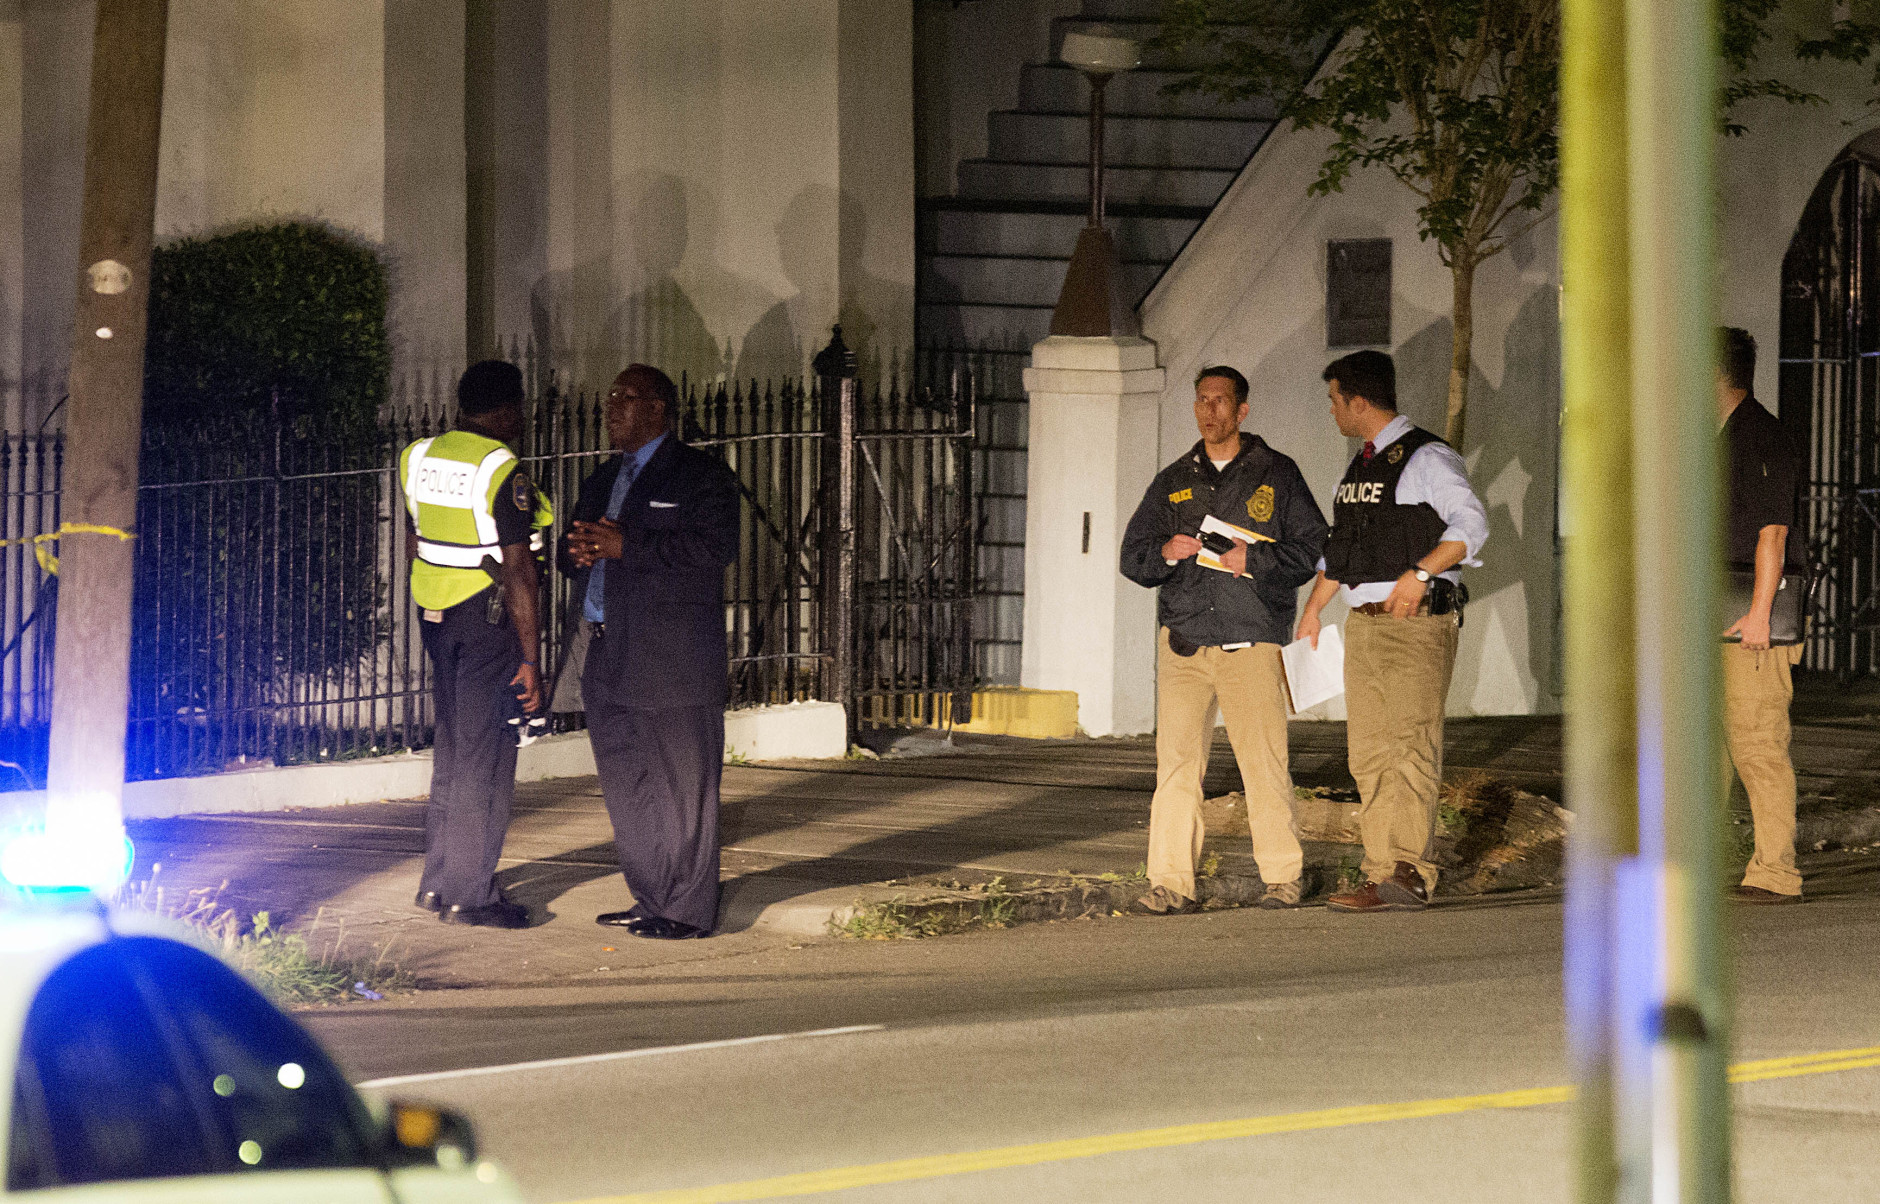 Police stand outside the Emanuel AME Church following a shooting Wednesday, June 17, 2015, in Charleston, S.C. (AP Photo/David Goldman)